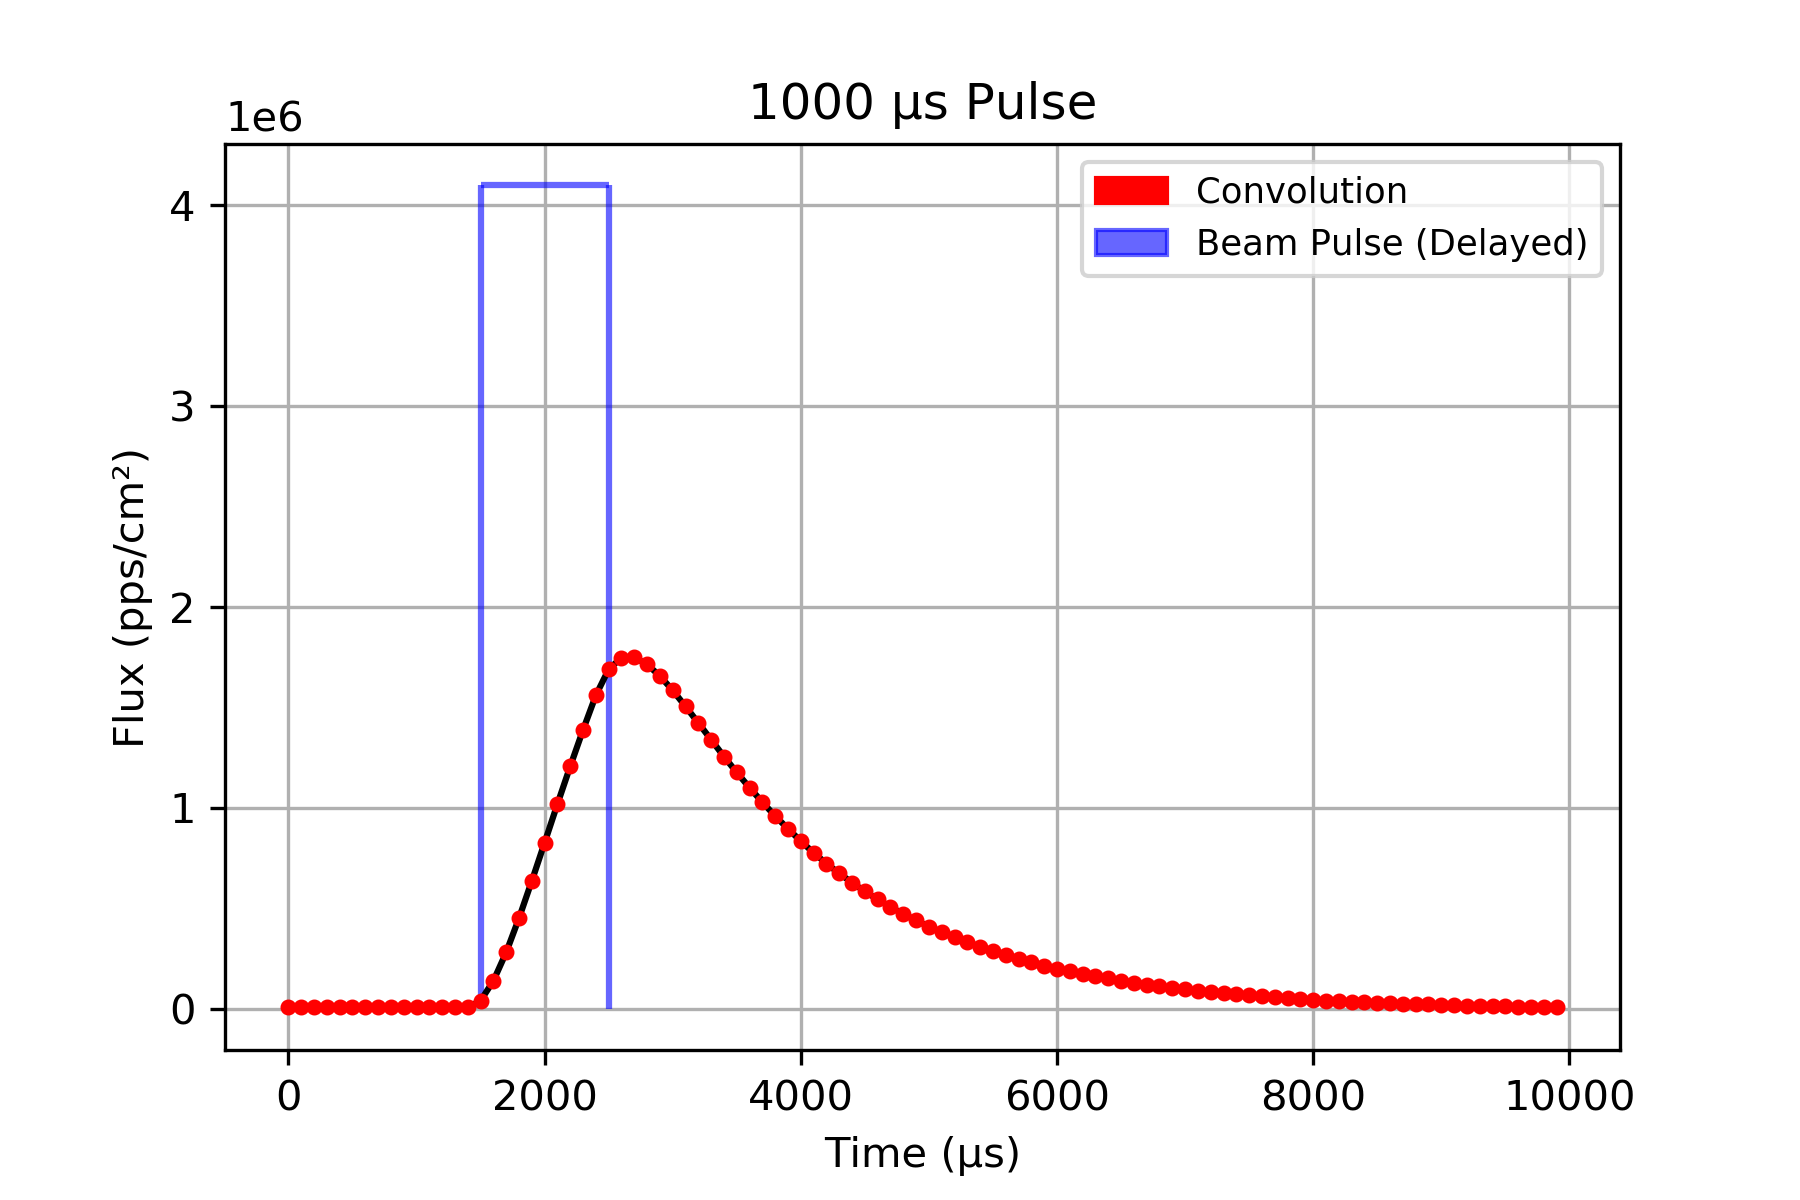 beam pulse and convolution curve from a single 1000 μs pulse of 40Ar.